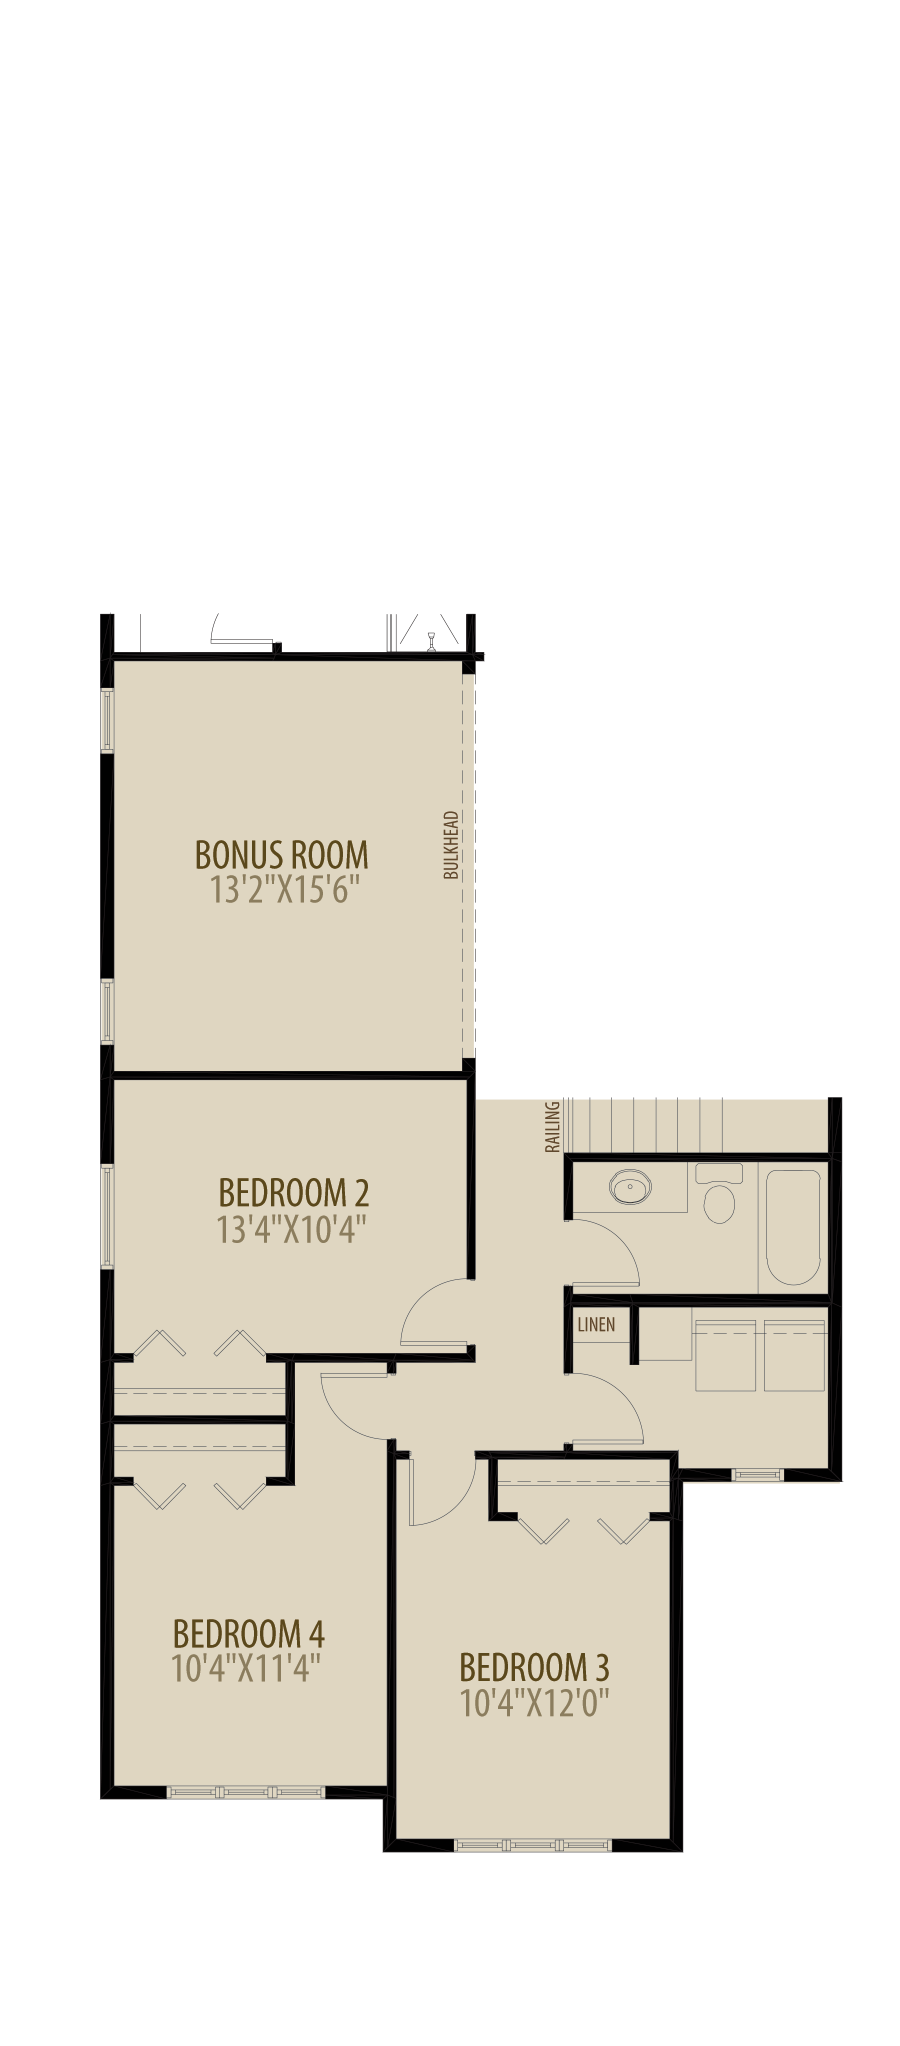 Optional 4th Bedroom adds 136 sq ft